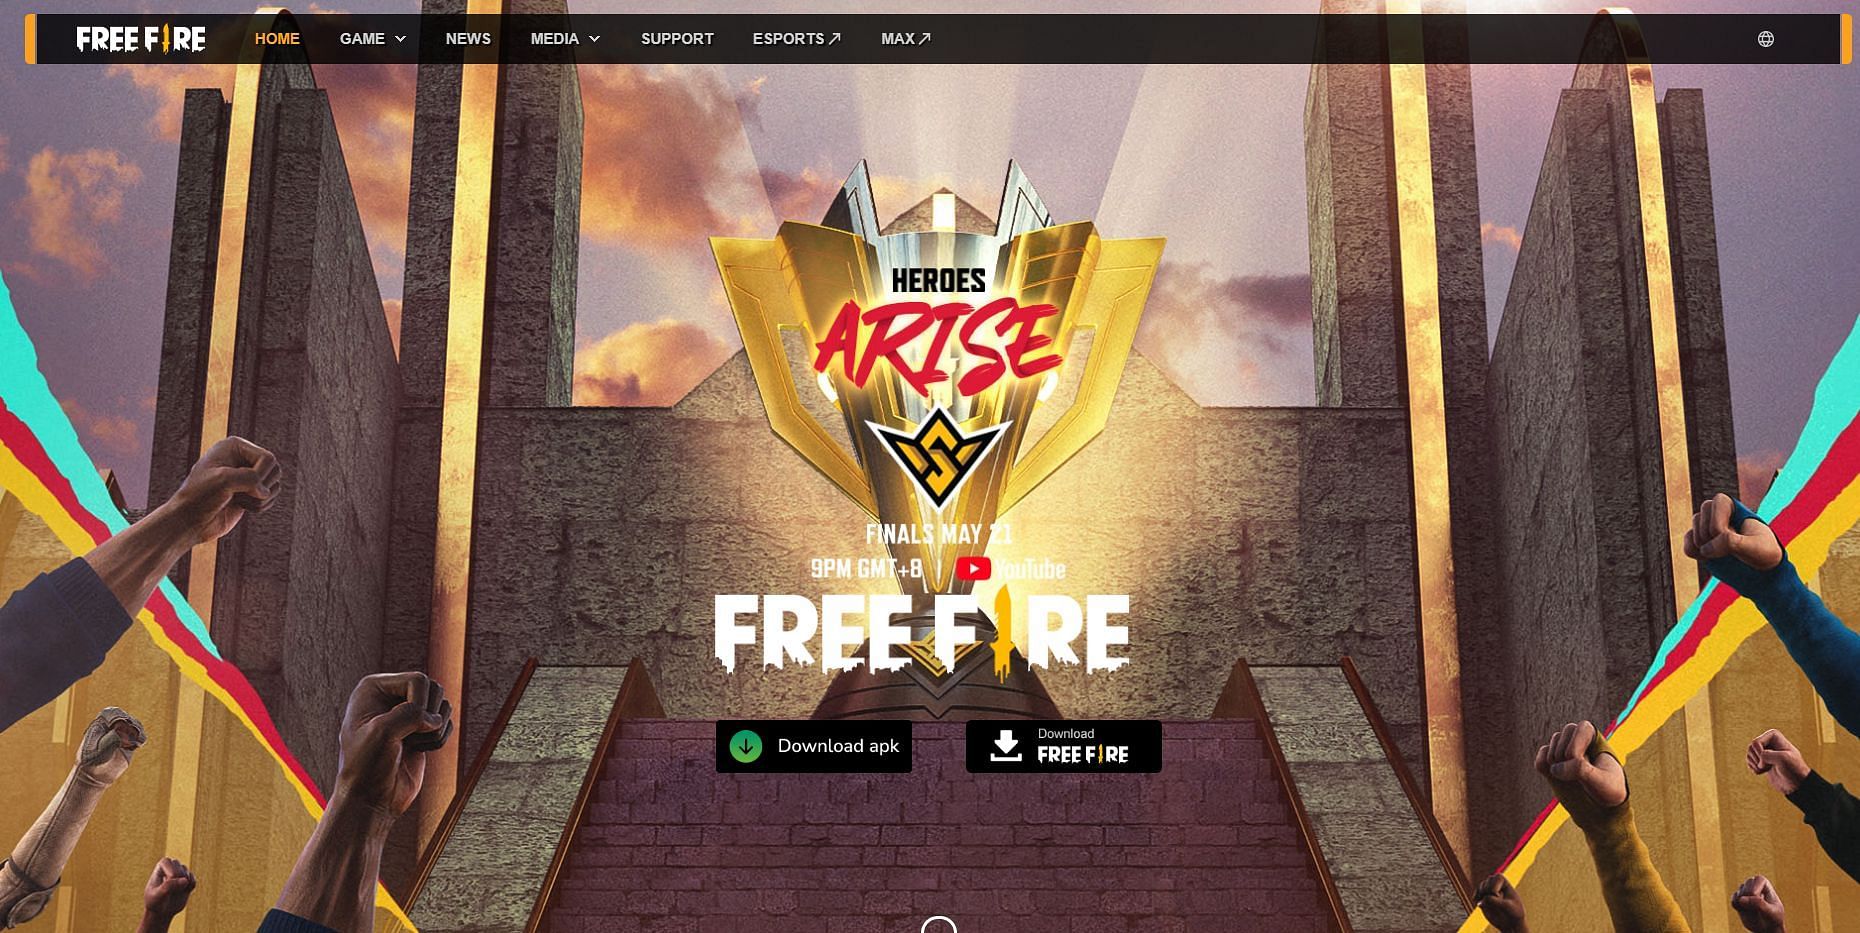 APK file is available on the official website of the battle royale game (Image via Garena)